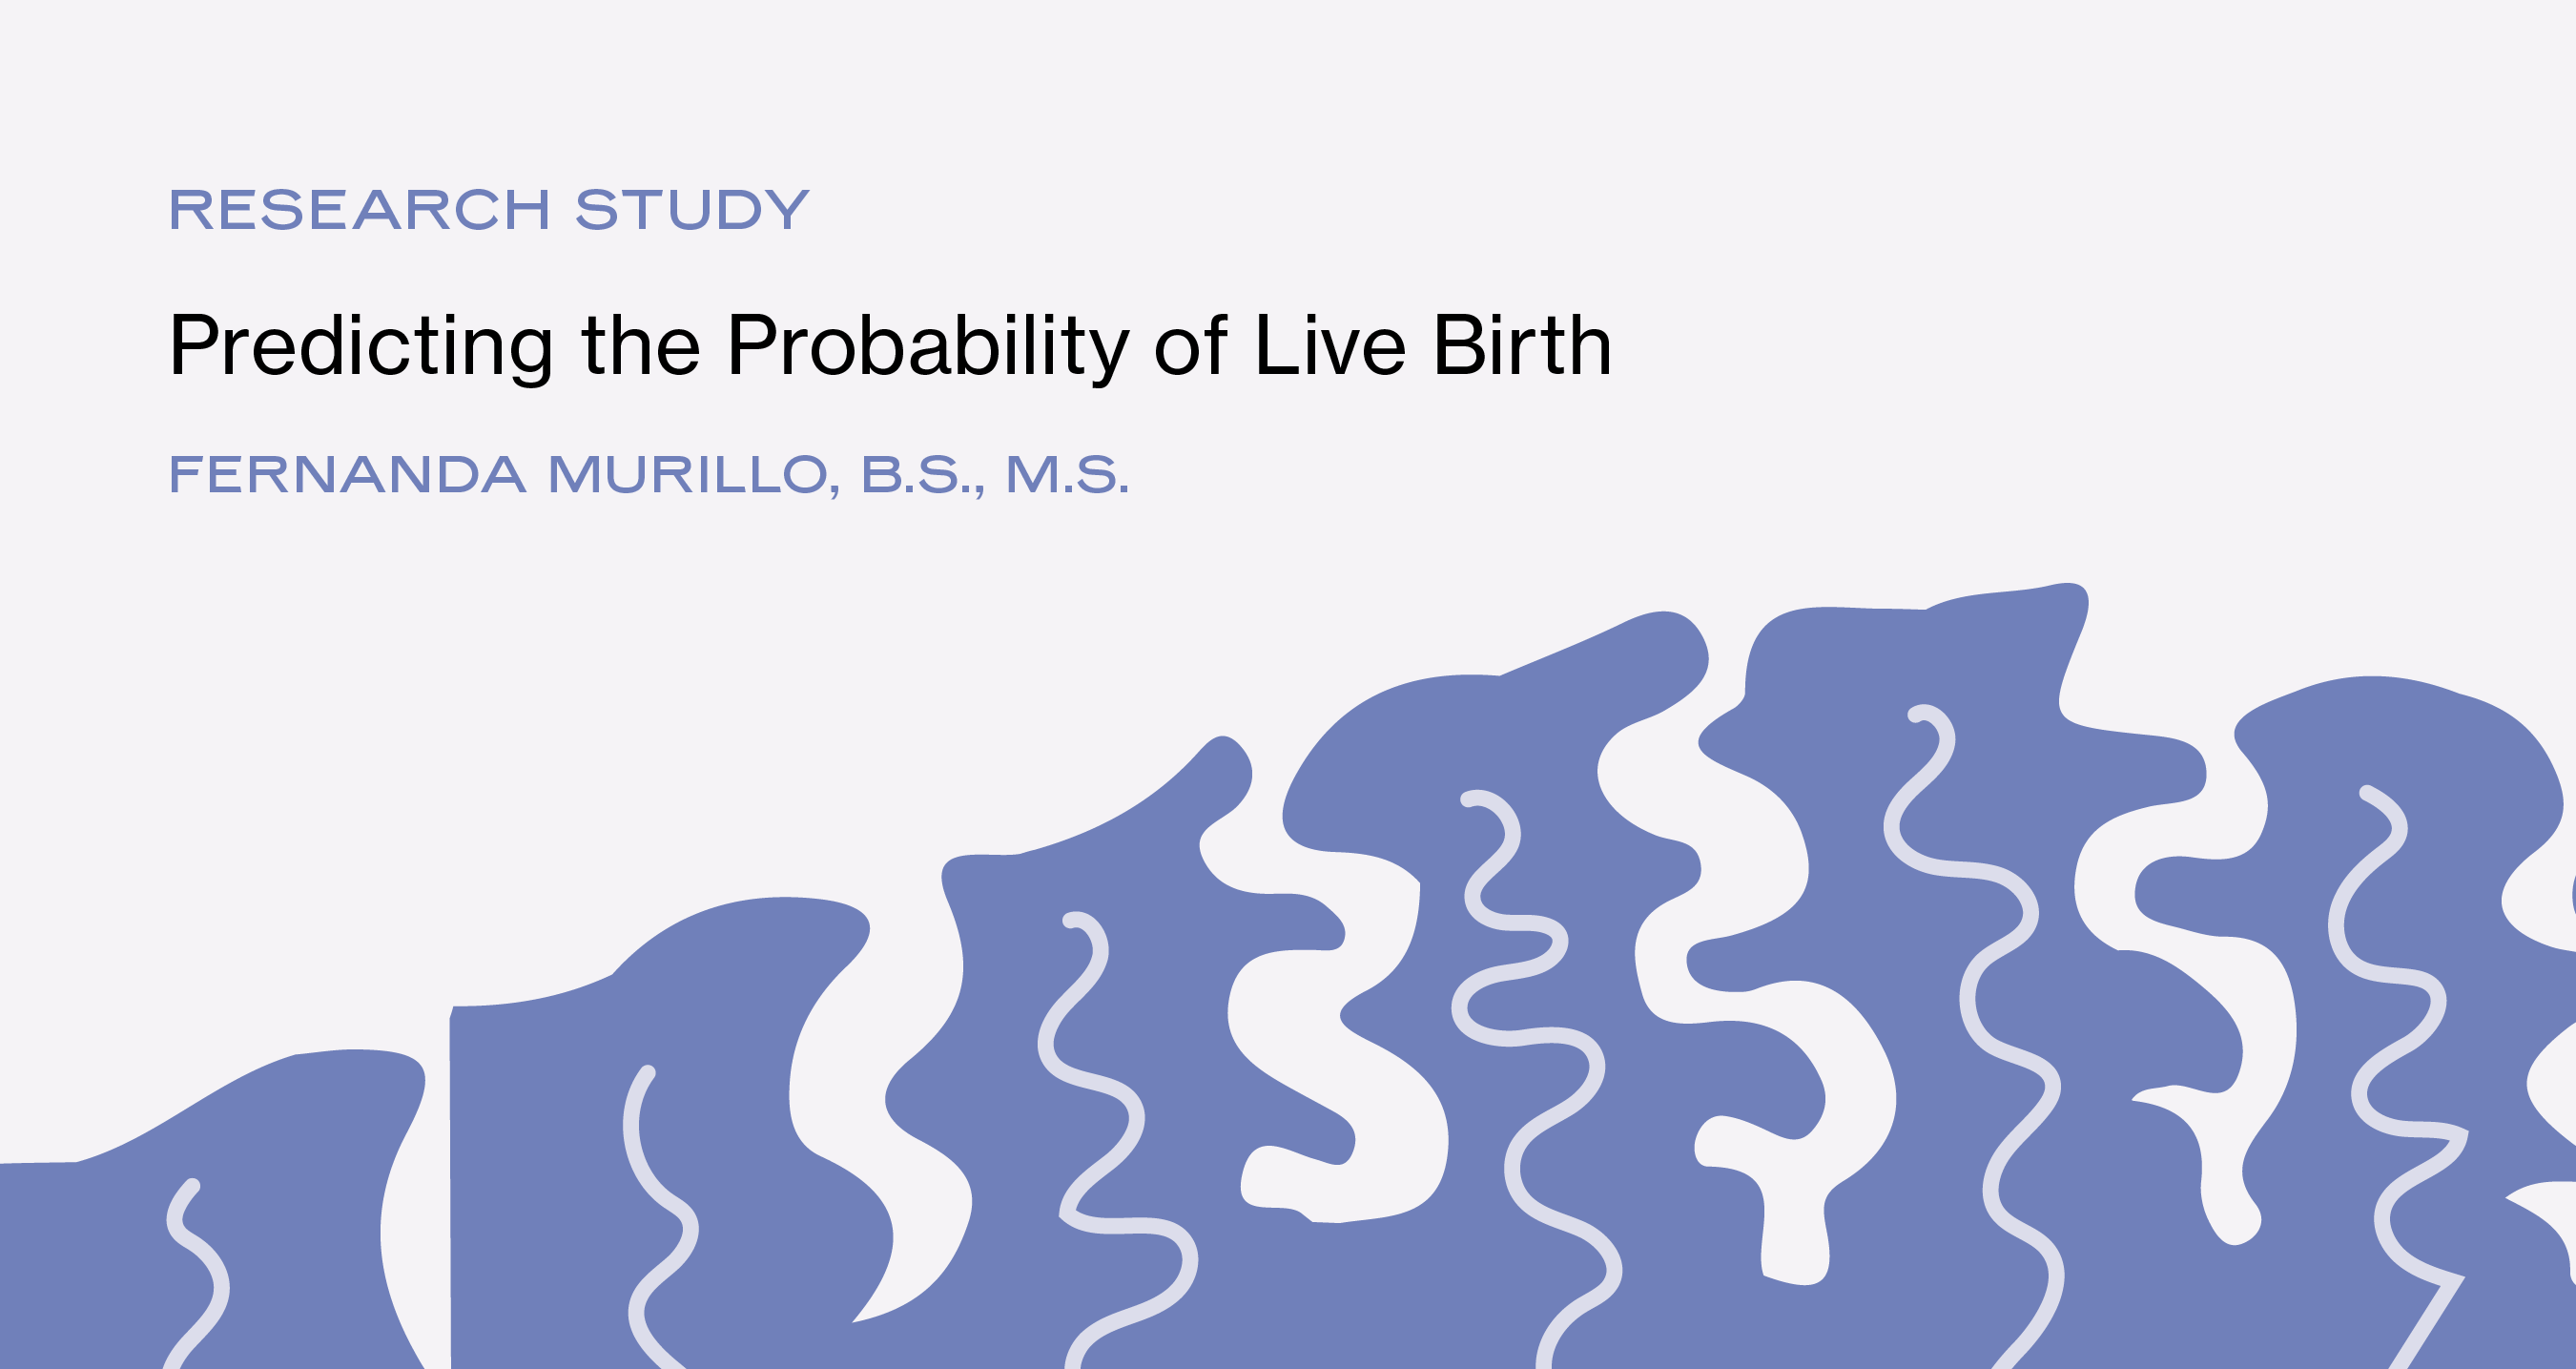 Why Is It Important to Be Able to Predict the Probability of a Live Birth?